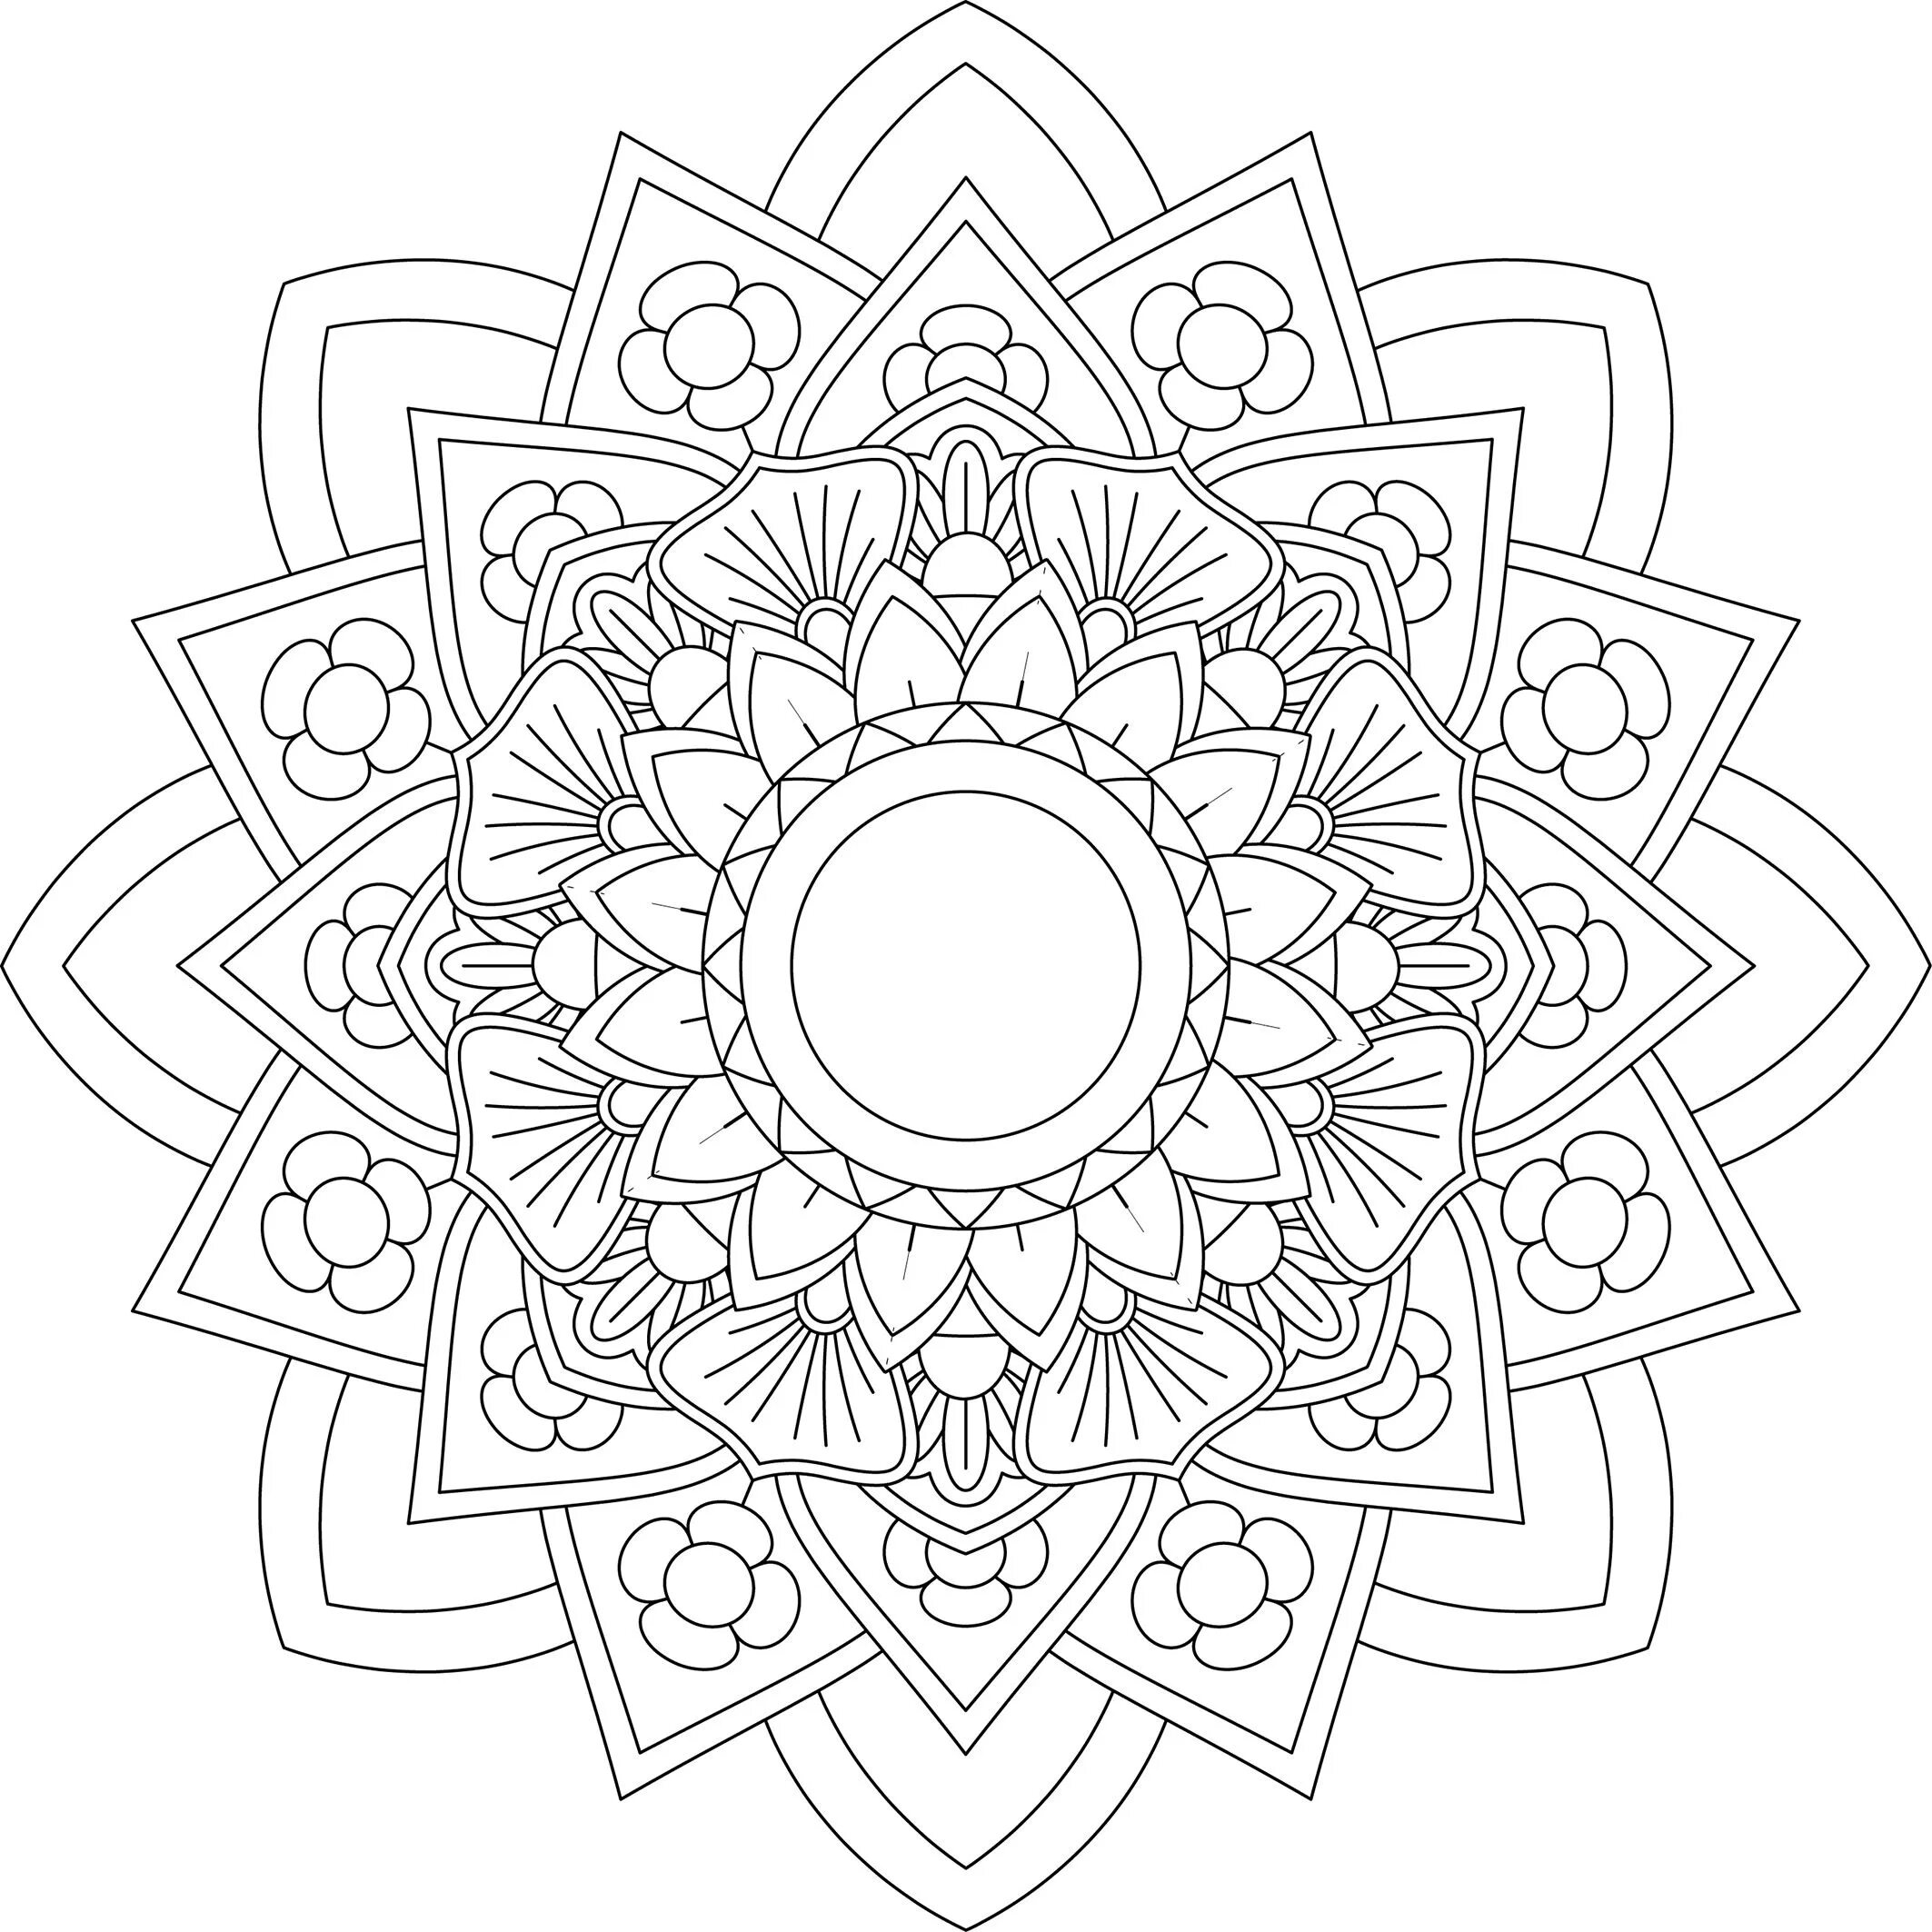 Relaxing coloring mandala peace and tranquility